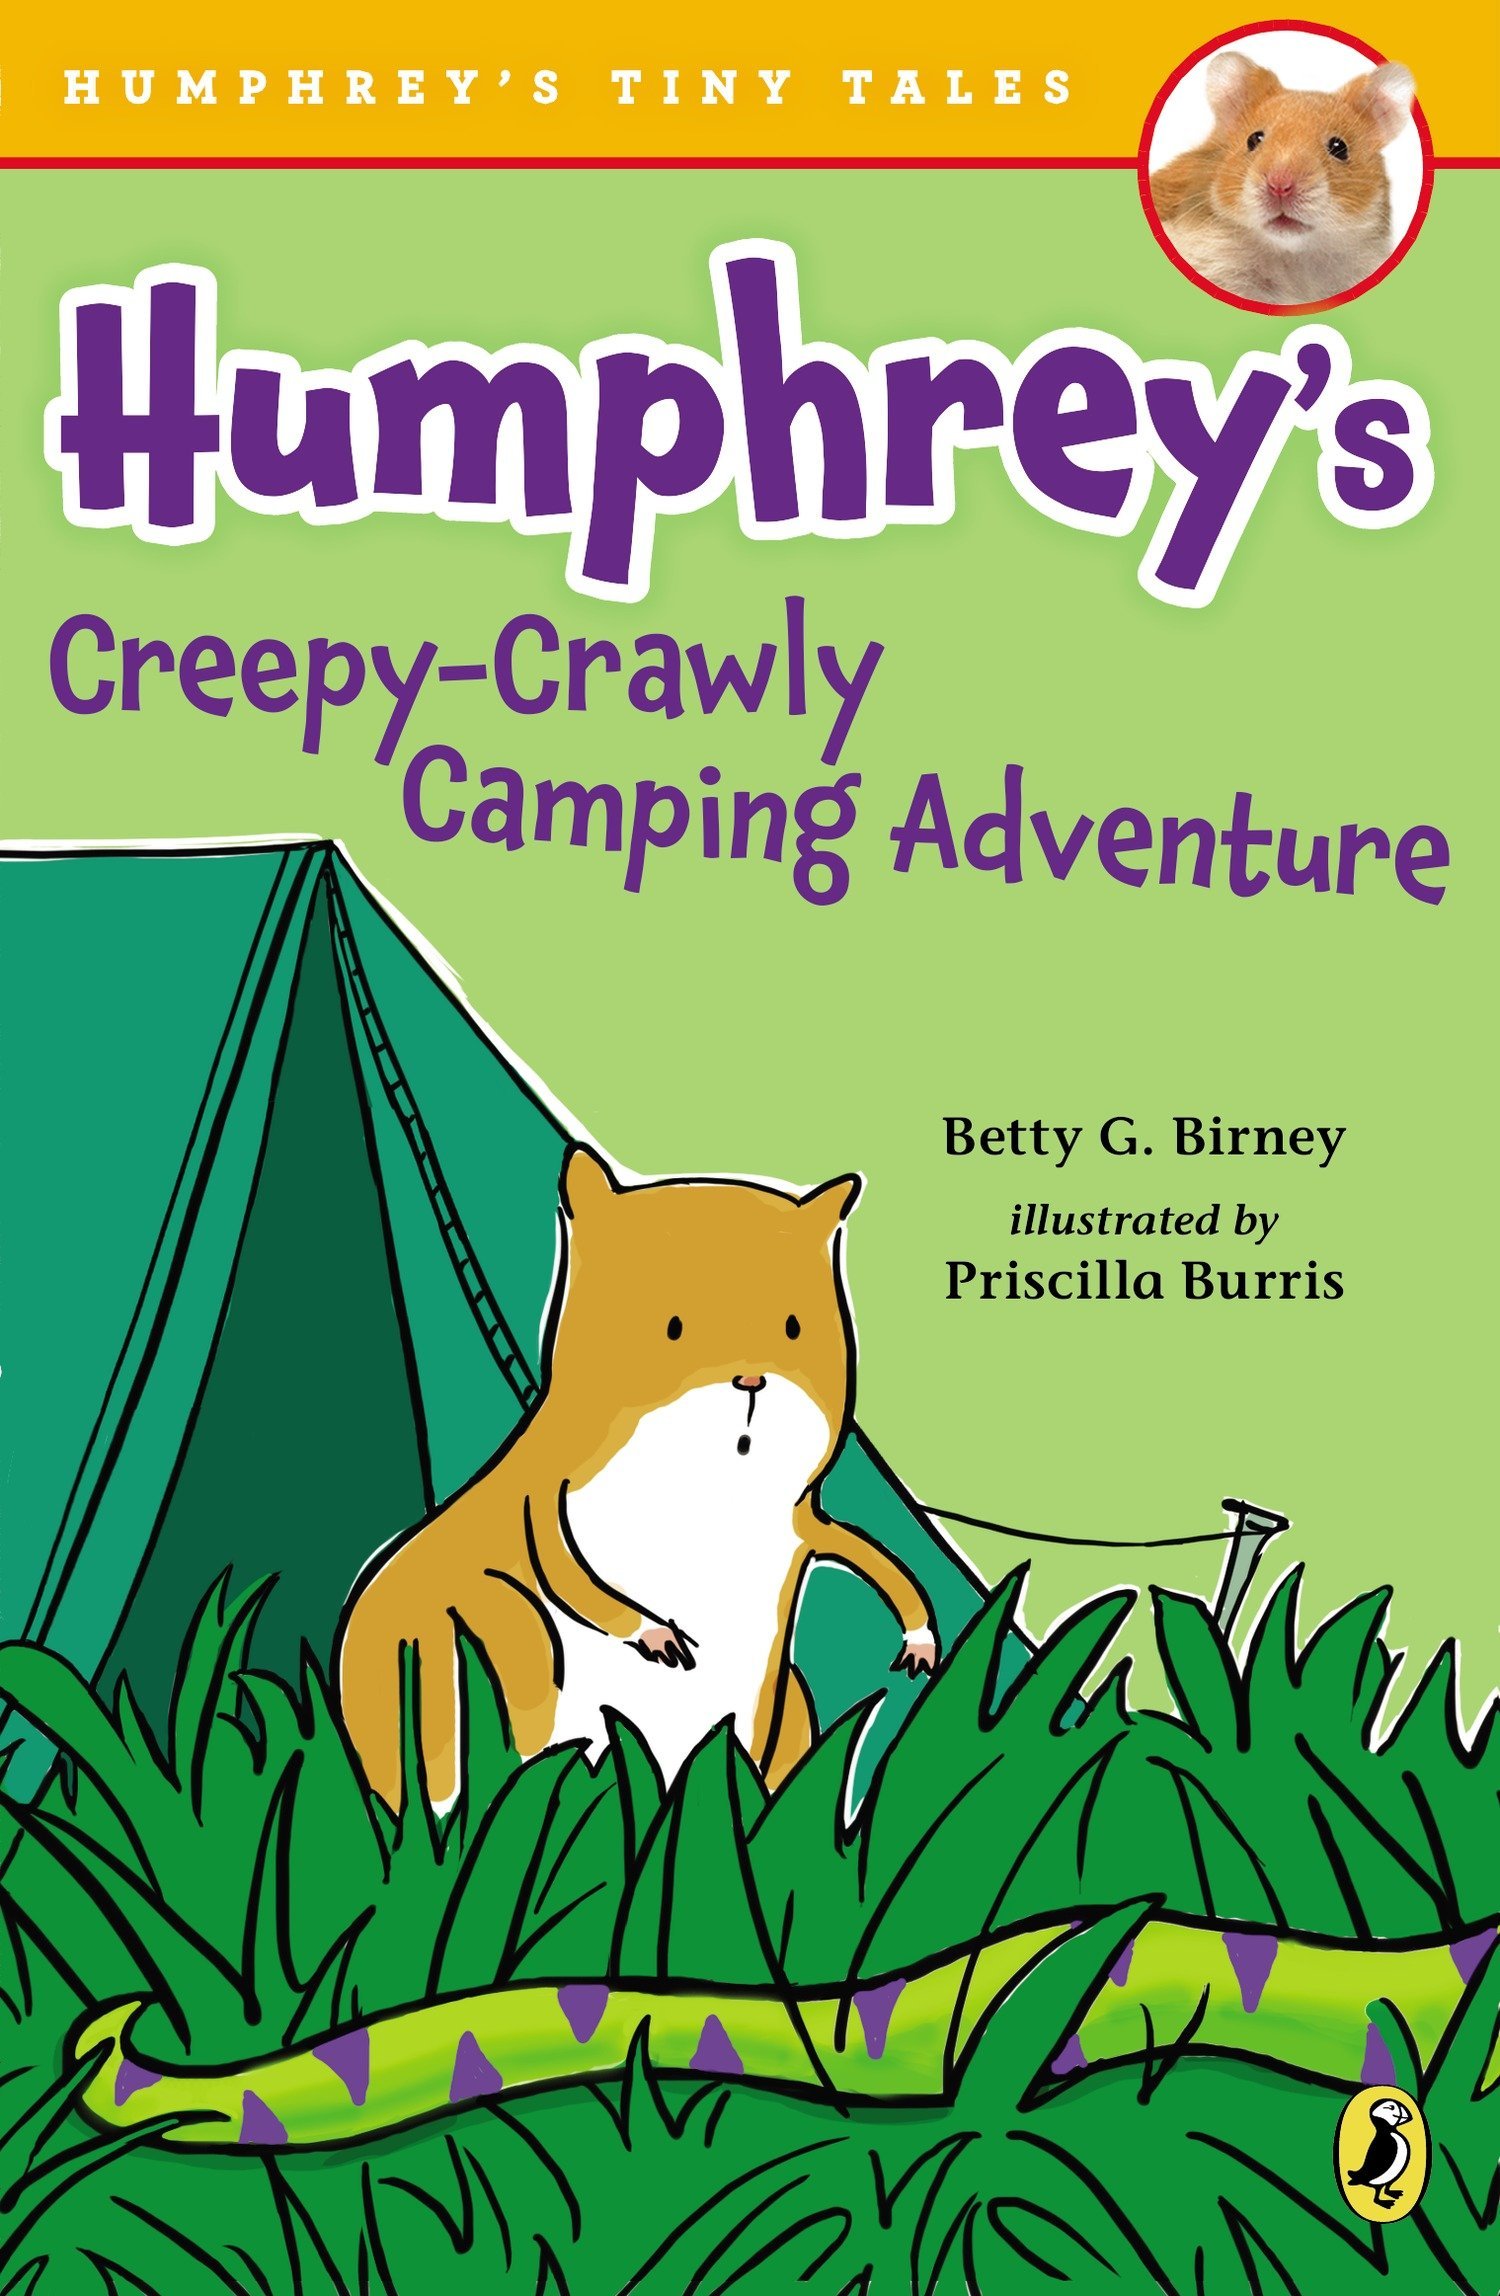 Cover of Humphrey's Creepy-Crawly Camping Adventure, showing a hamster in front of a green tent looking at a green snake in the grass.